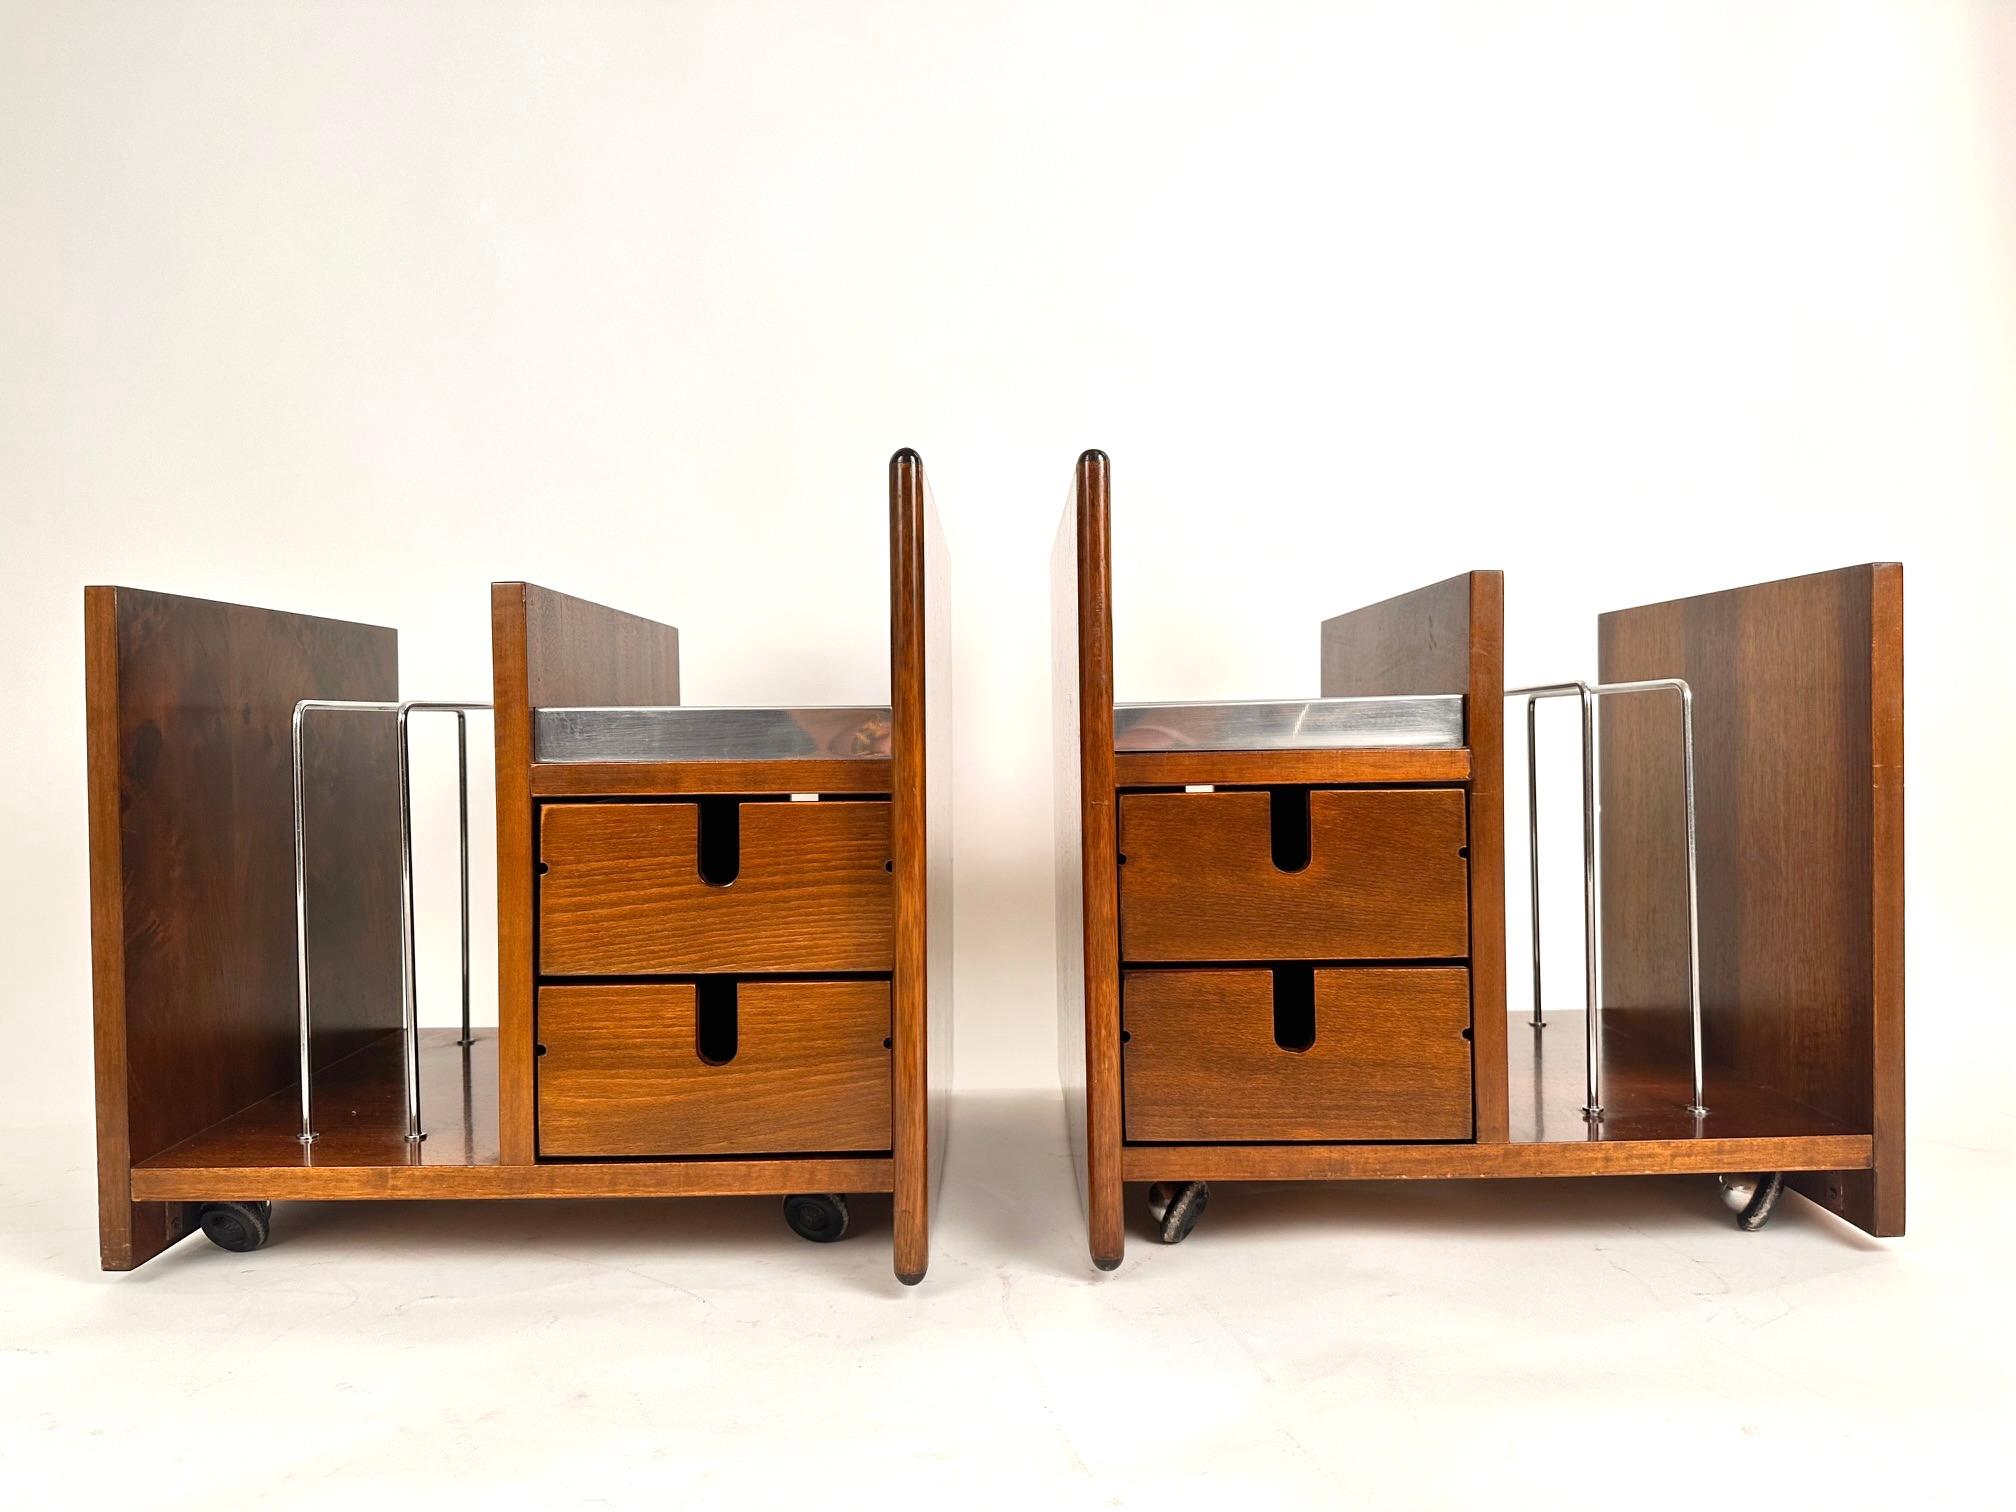 A very rare set of a pair of side tables/magazine racks designed by Ettore Sottsass in the 70s.Two boxes together wit a magazine rack space.Teak and steel.Excellent condition.
Free professional packing provided.